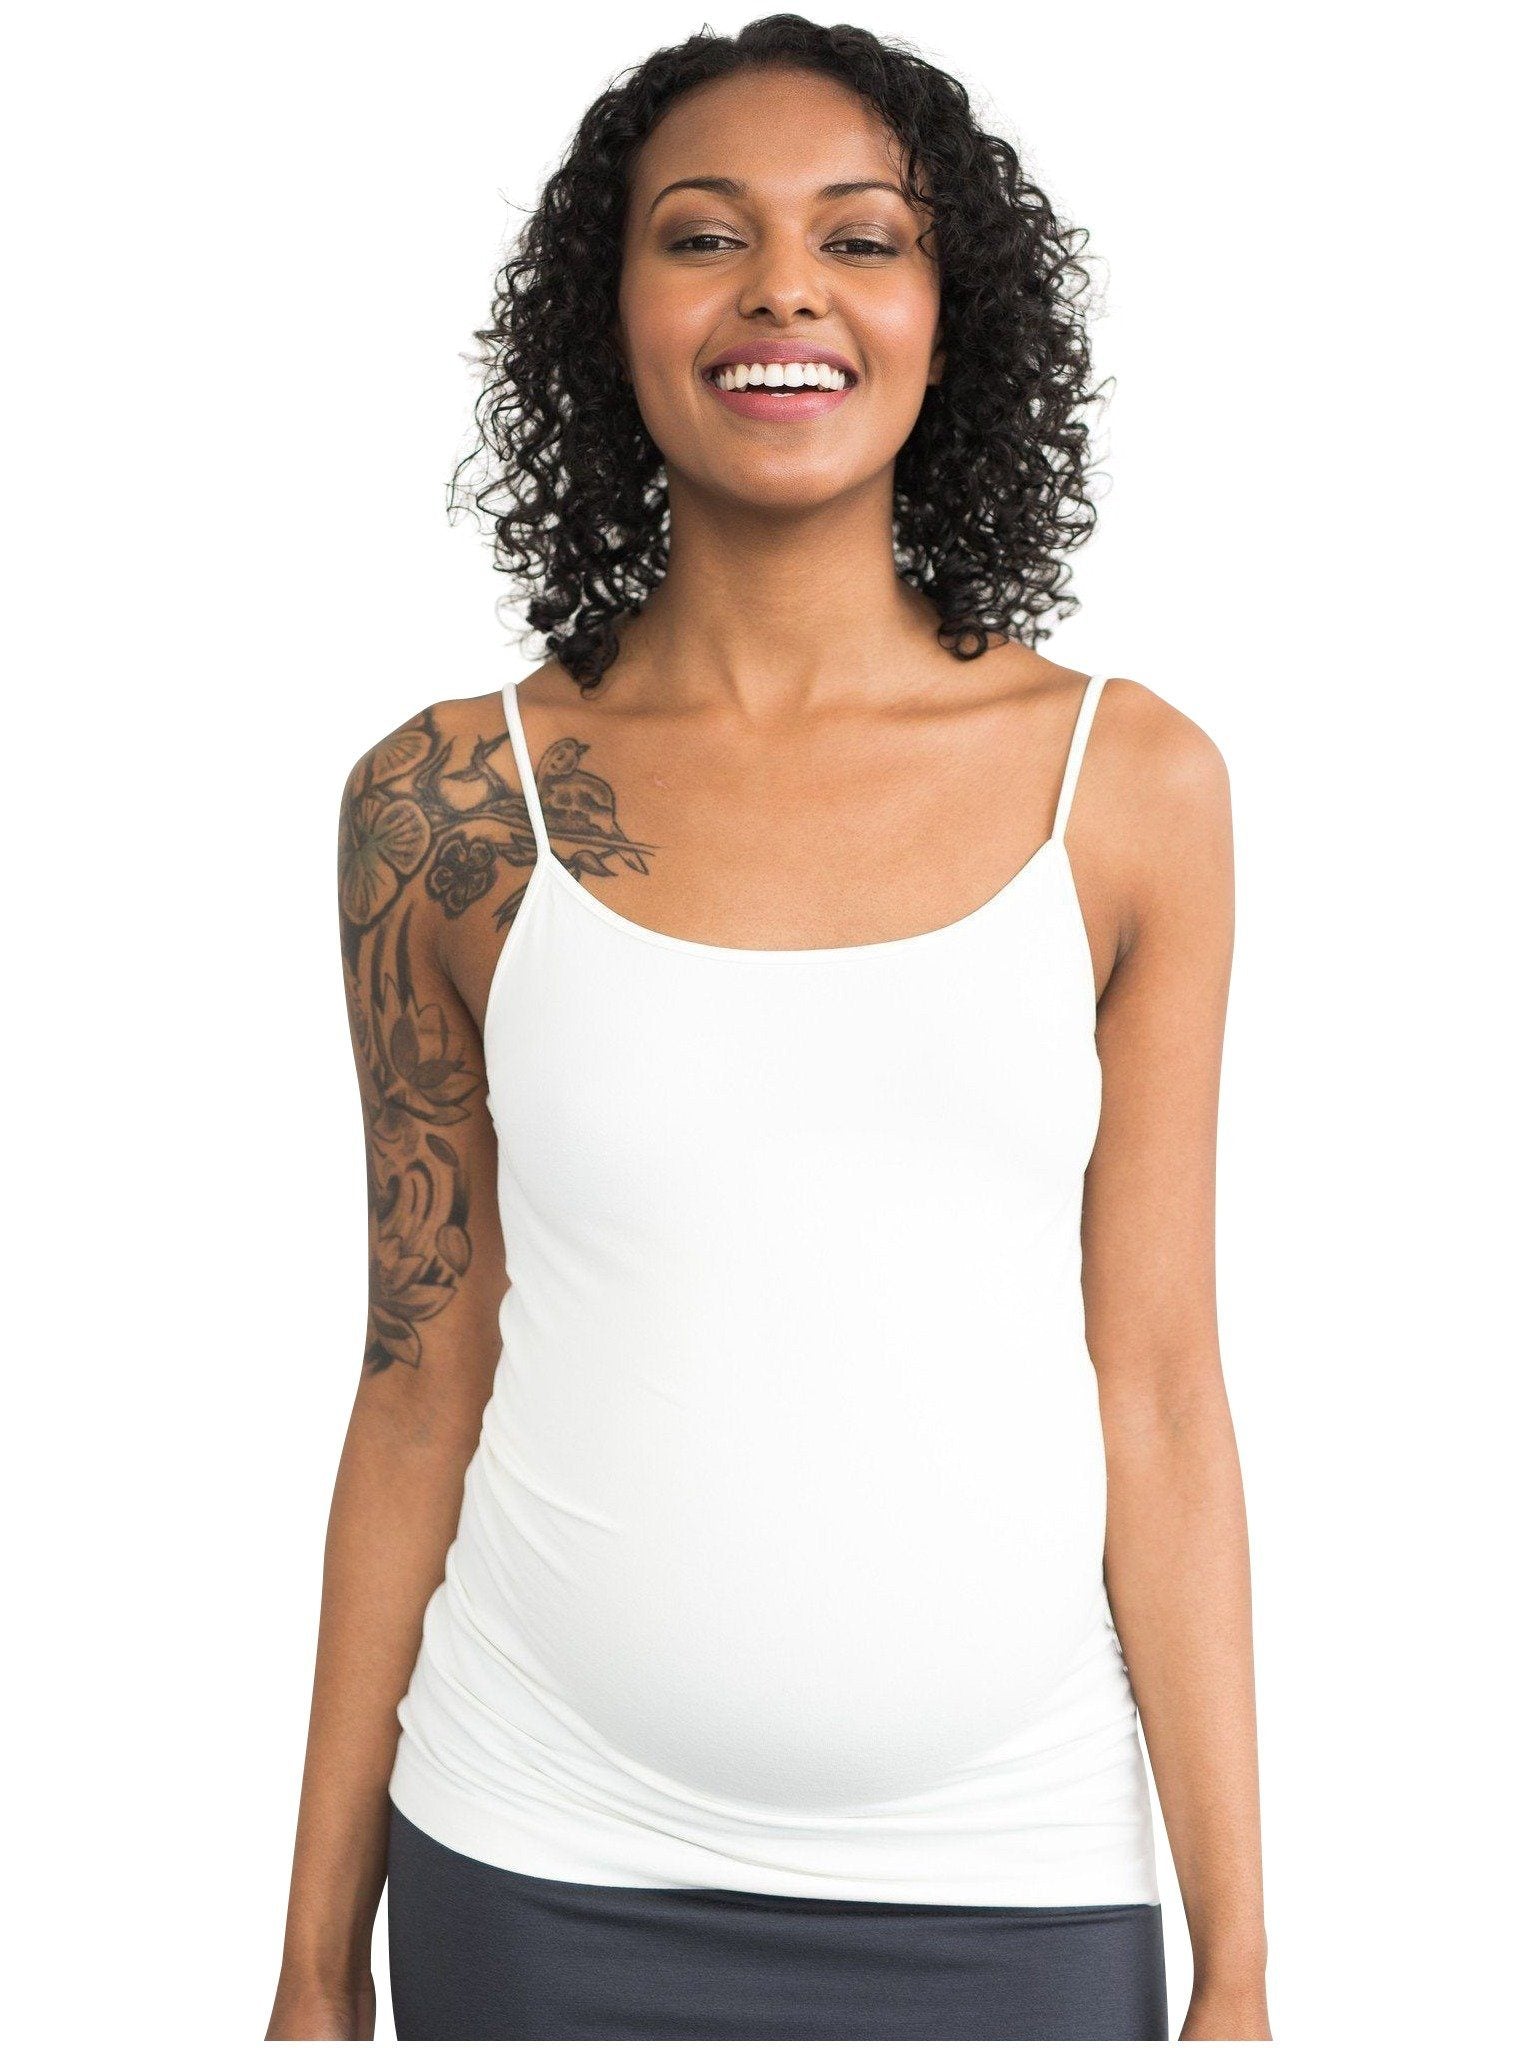 Melinda G - Pregnant and/or breastfeeding, our Cami Sutra Nursing Cami is  perfect for layering, perfect for wearing with jeans or skirts, for work or  play, all day, all night, every day